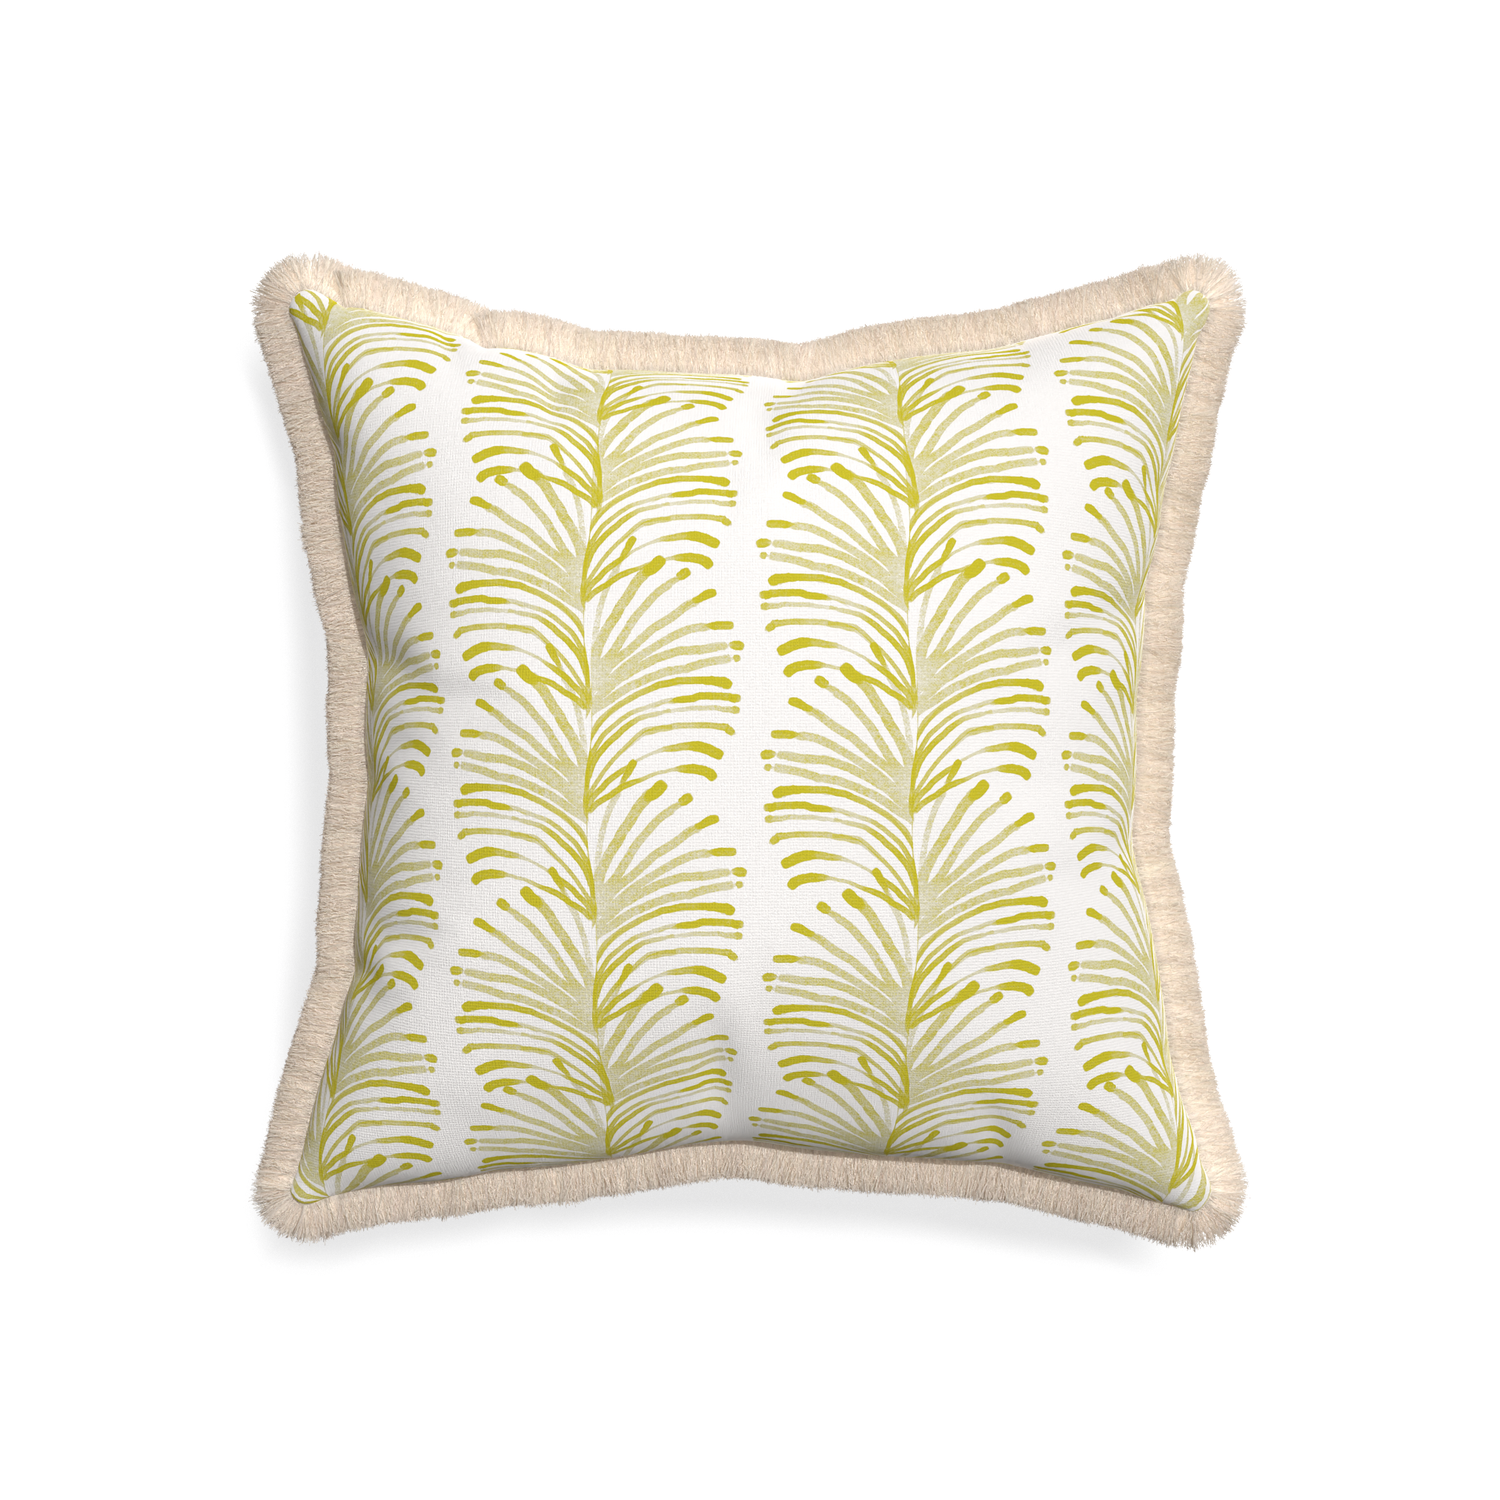 20-square emma chartreuse custom pillow with cream fringe on white background